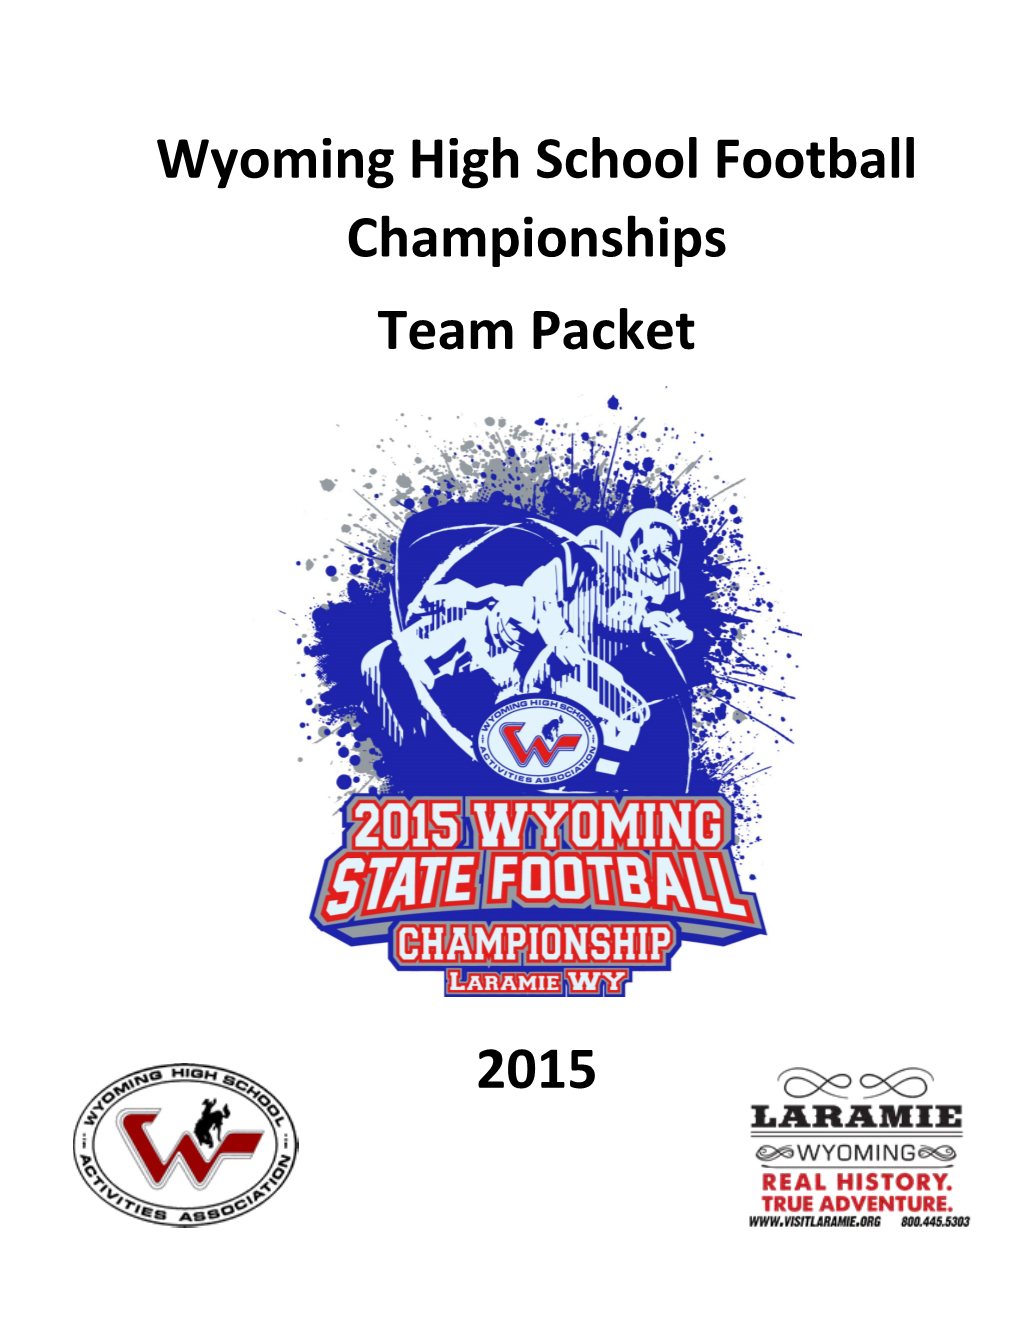 Wyoming High School Football Championships Team Packet 2015